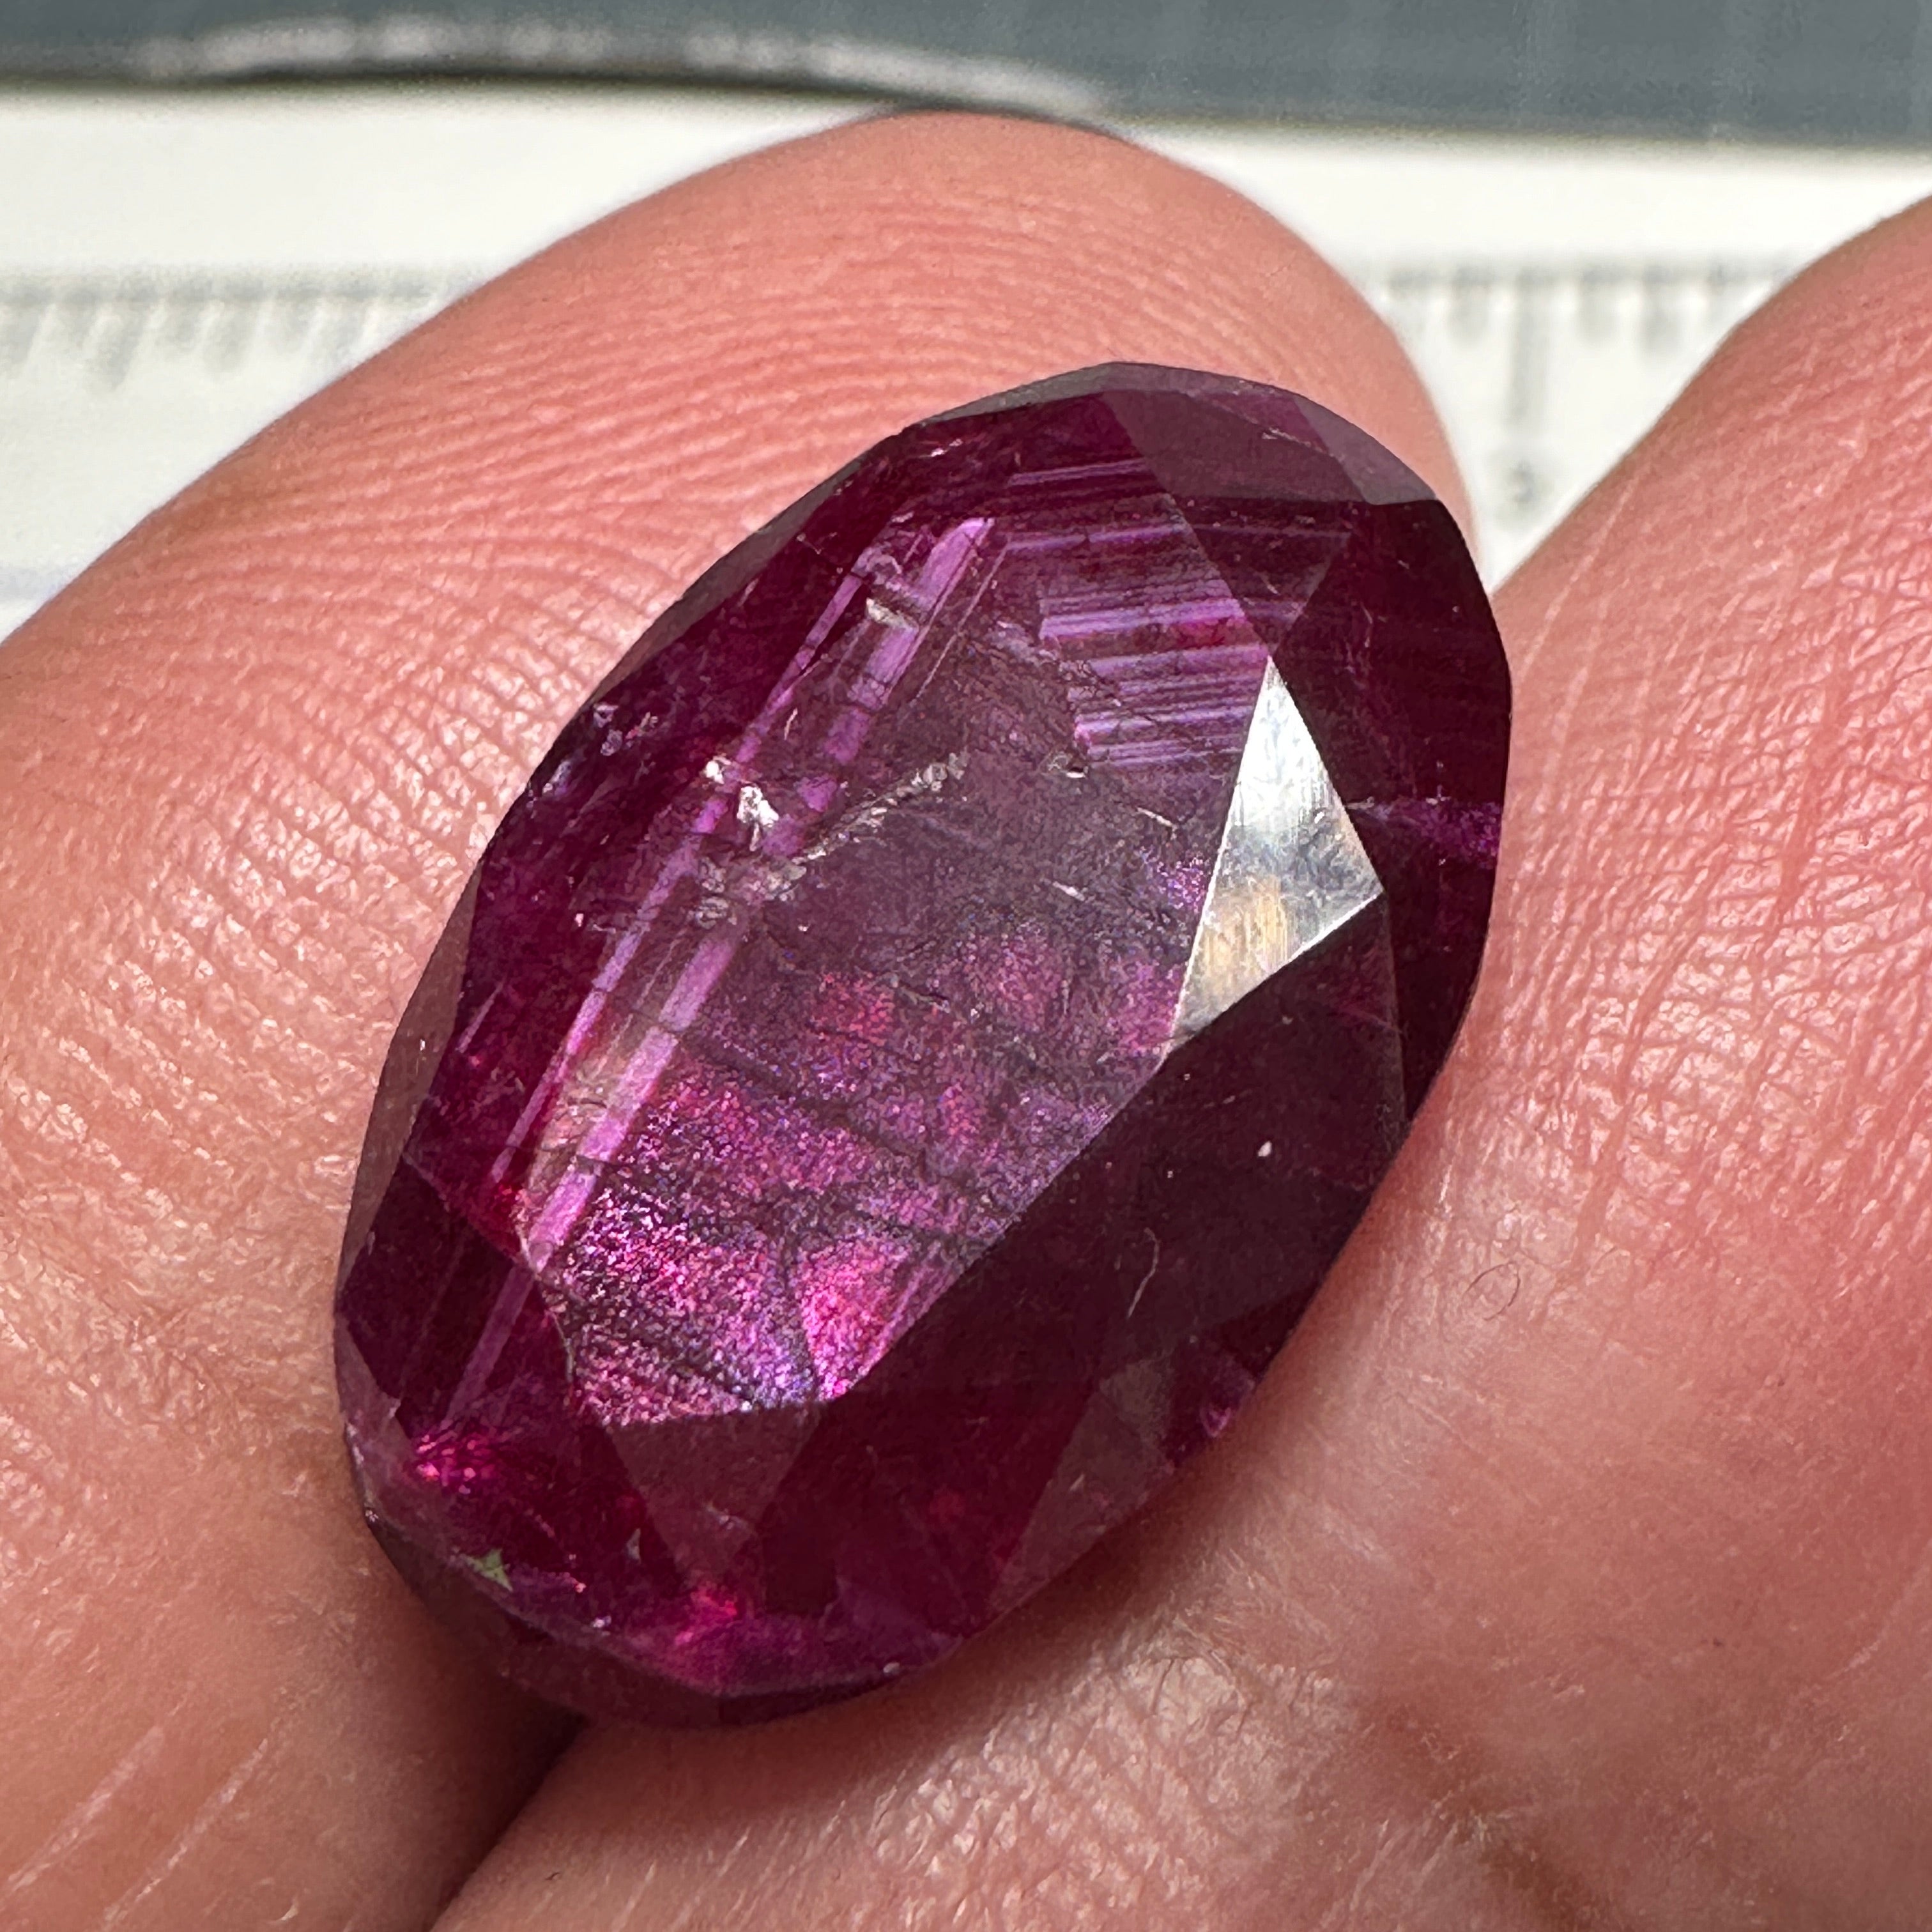 11.37ct Ruby, Longido, Tanzania, Untreated Unheated. Opaque but colour is out of this world